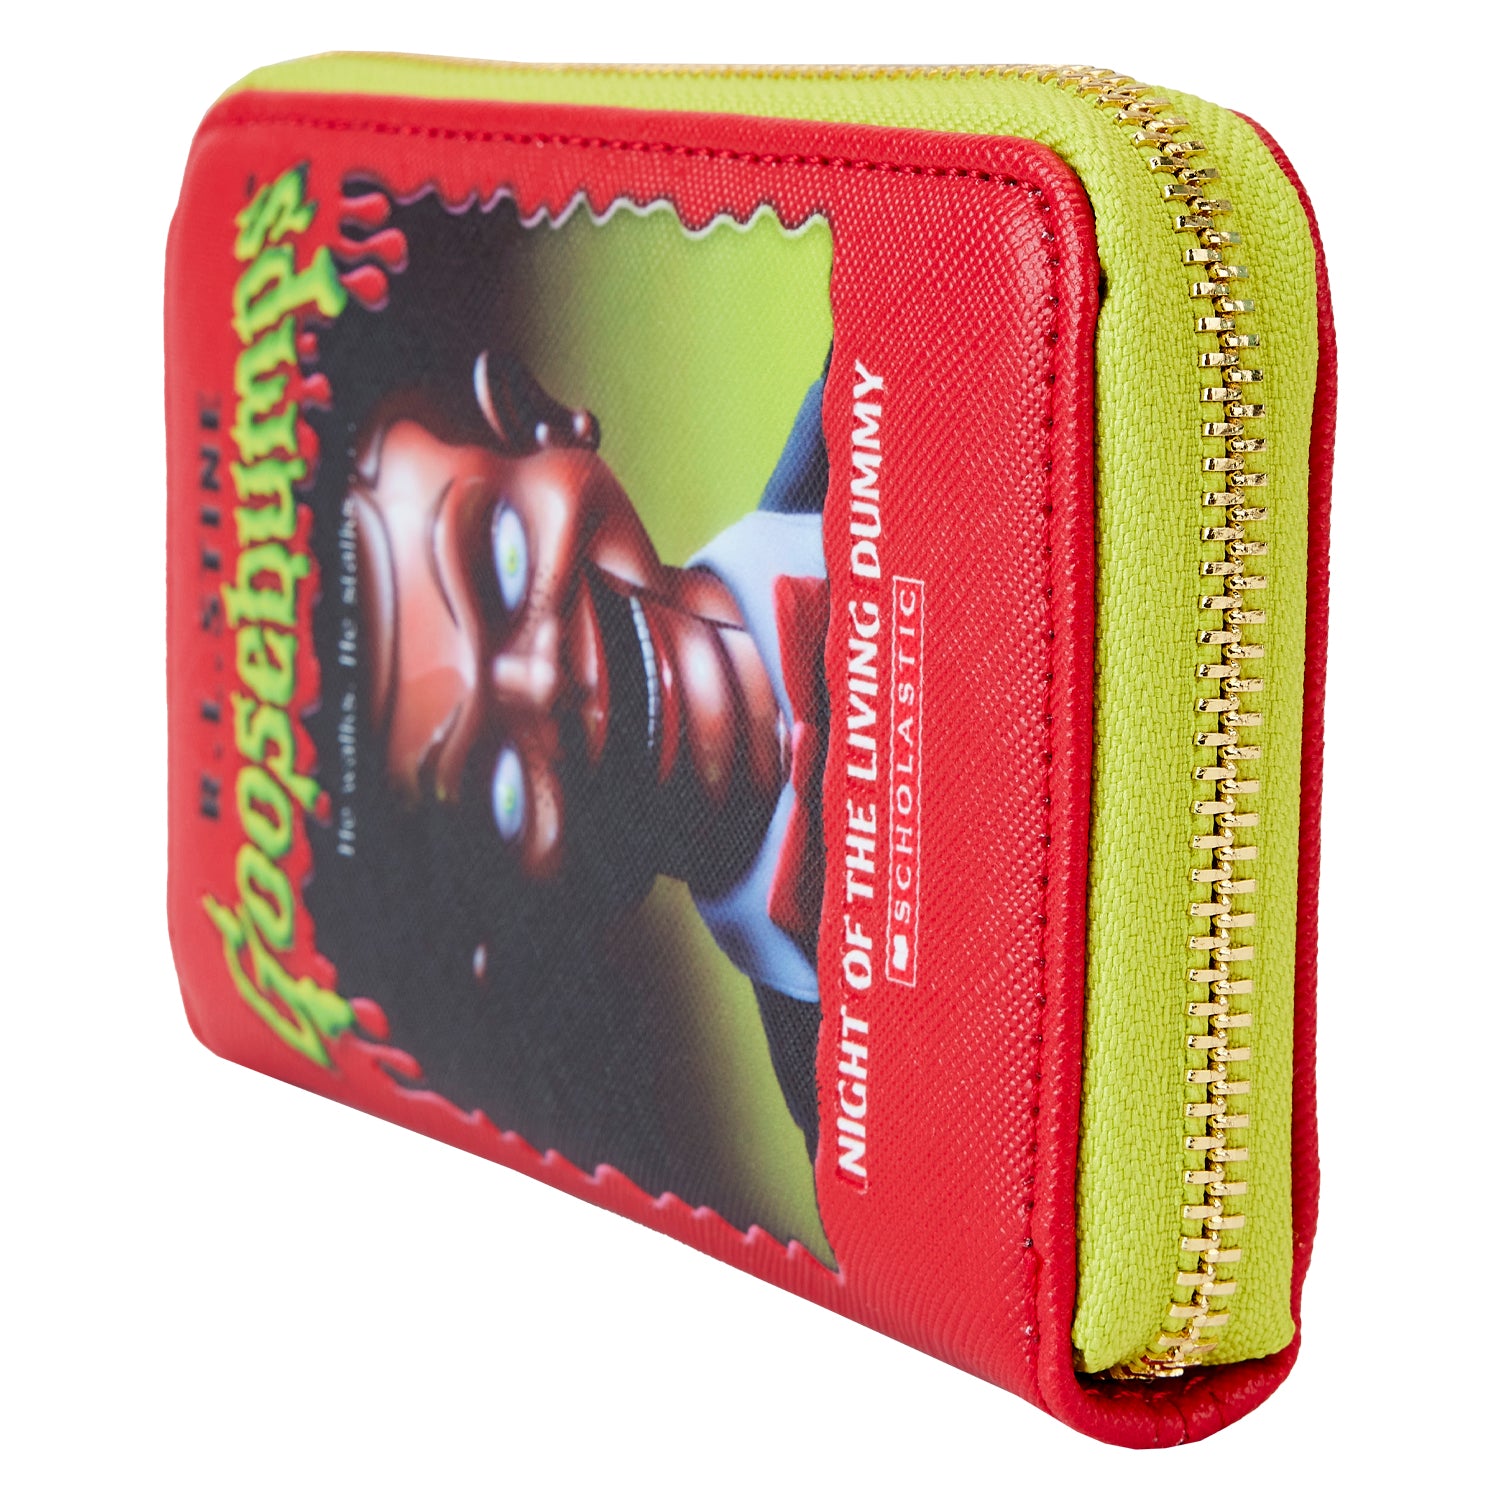 Loungefly Sony Goosebumps Book Cover Zip Wallet